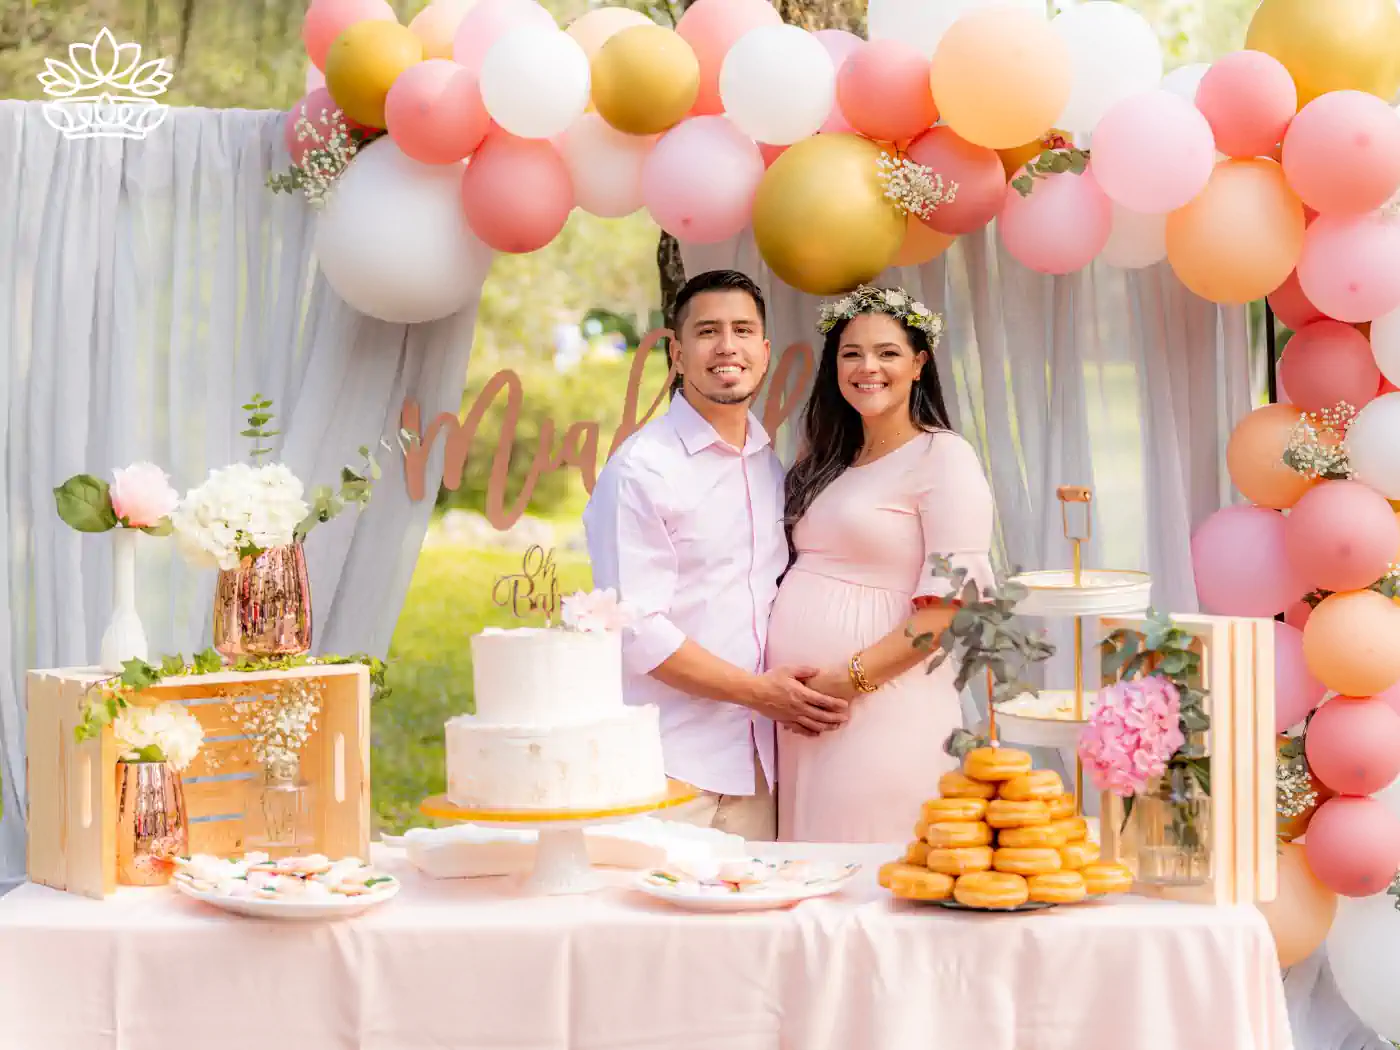 A happy couple at a baby shower, standing by a beautifully decorated table with a cake, flowers, and balloons in pastel colours. Fabulous Flowers and Gifts: Baby Shower Flowers Collection